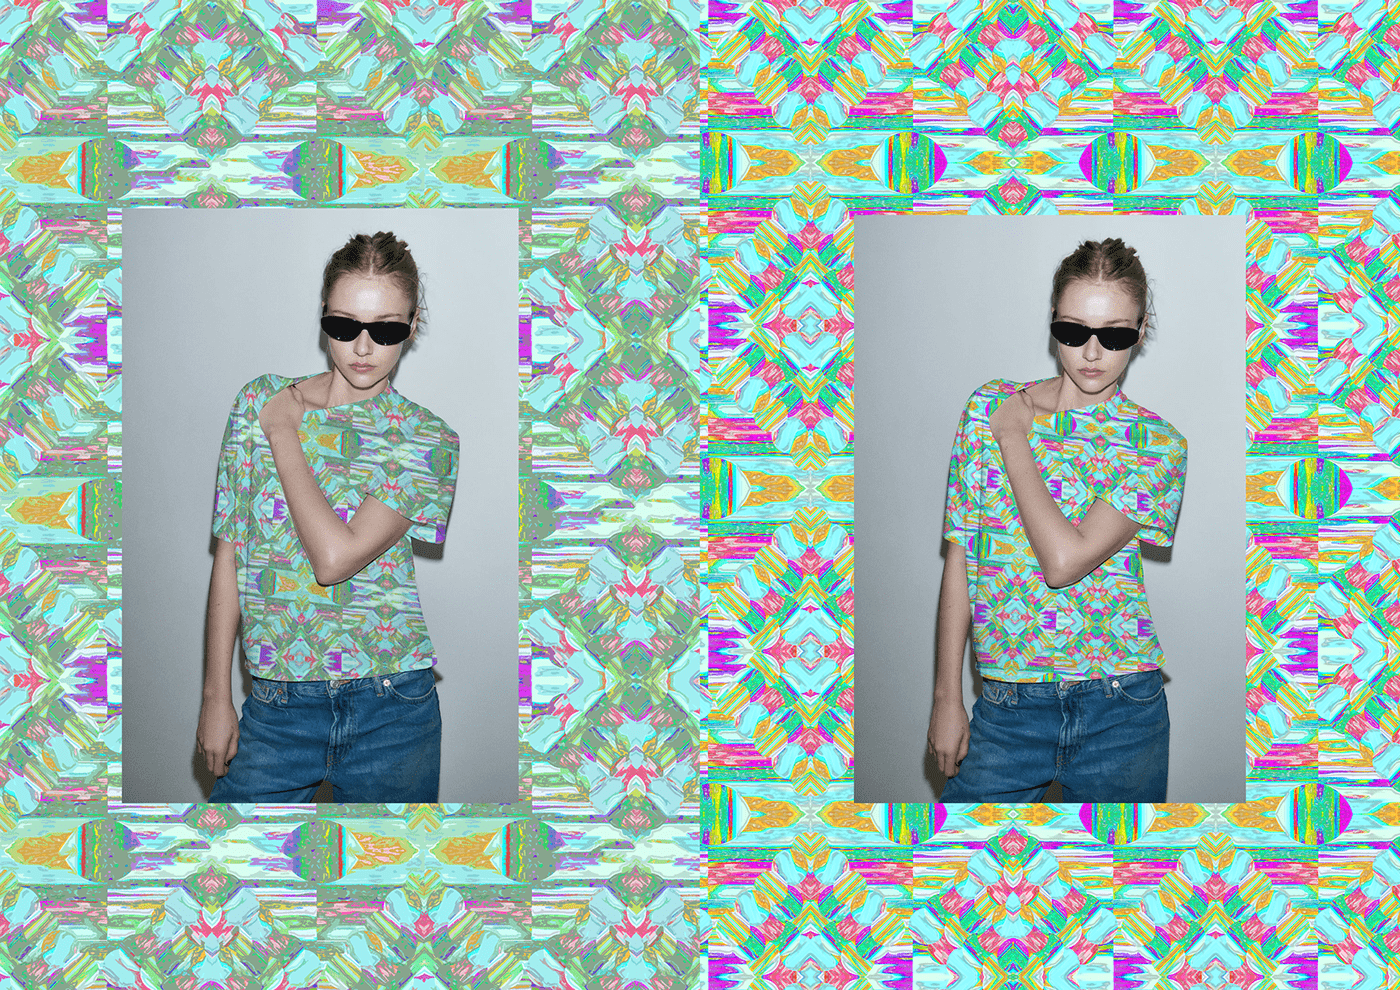 textile adobephotoshop geometric pattern trippy abstract colorful pattern designer